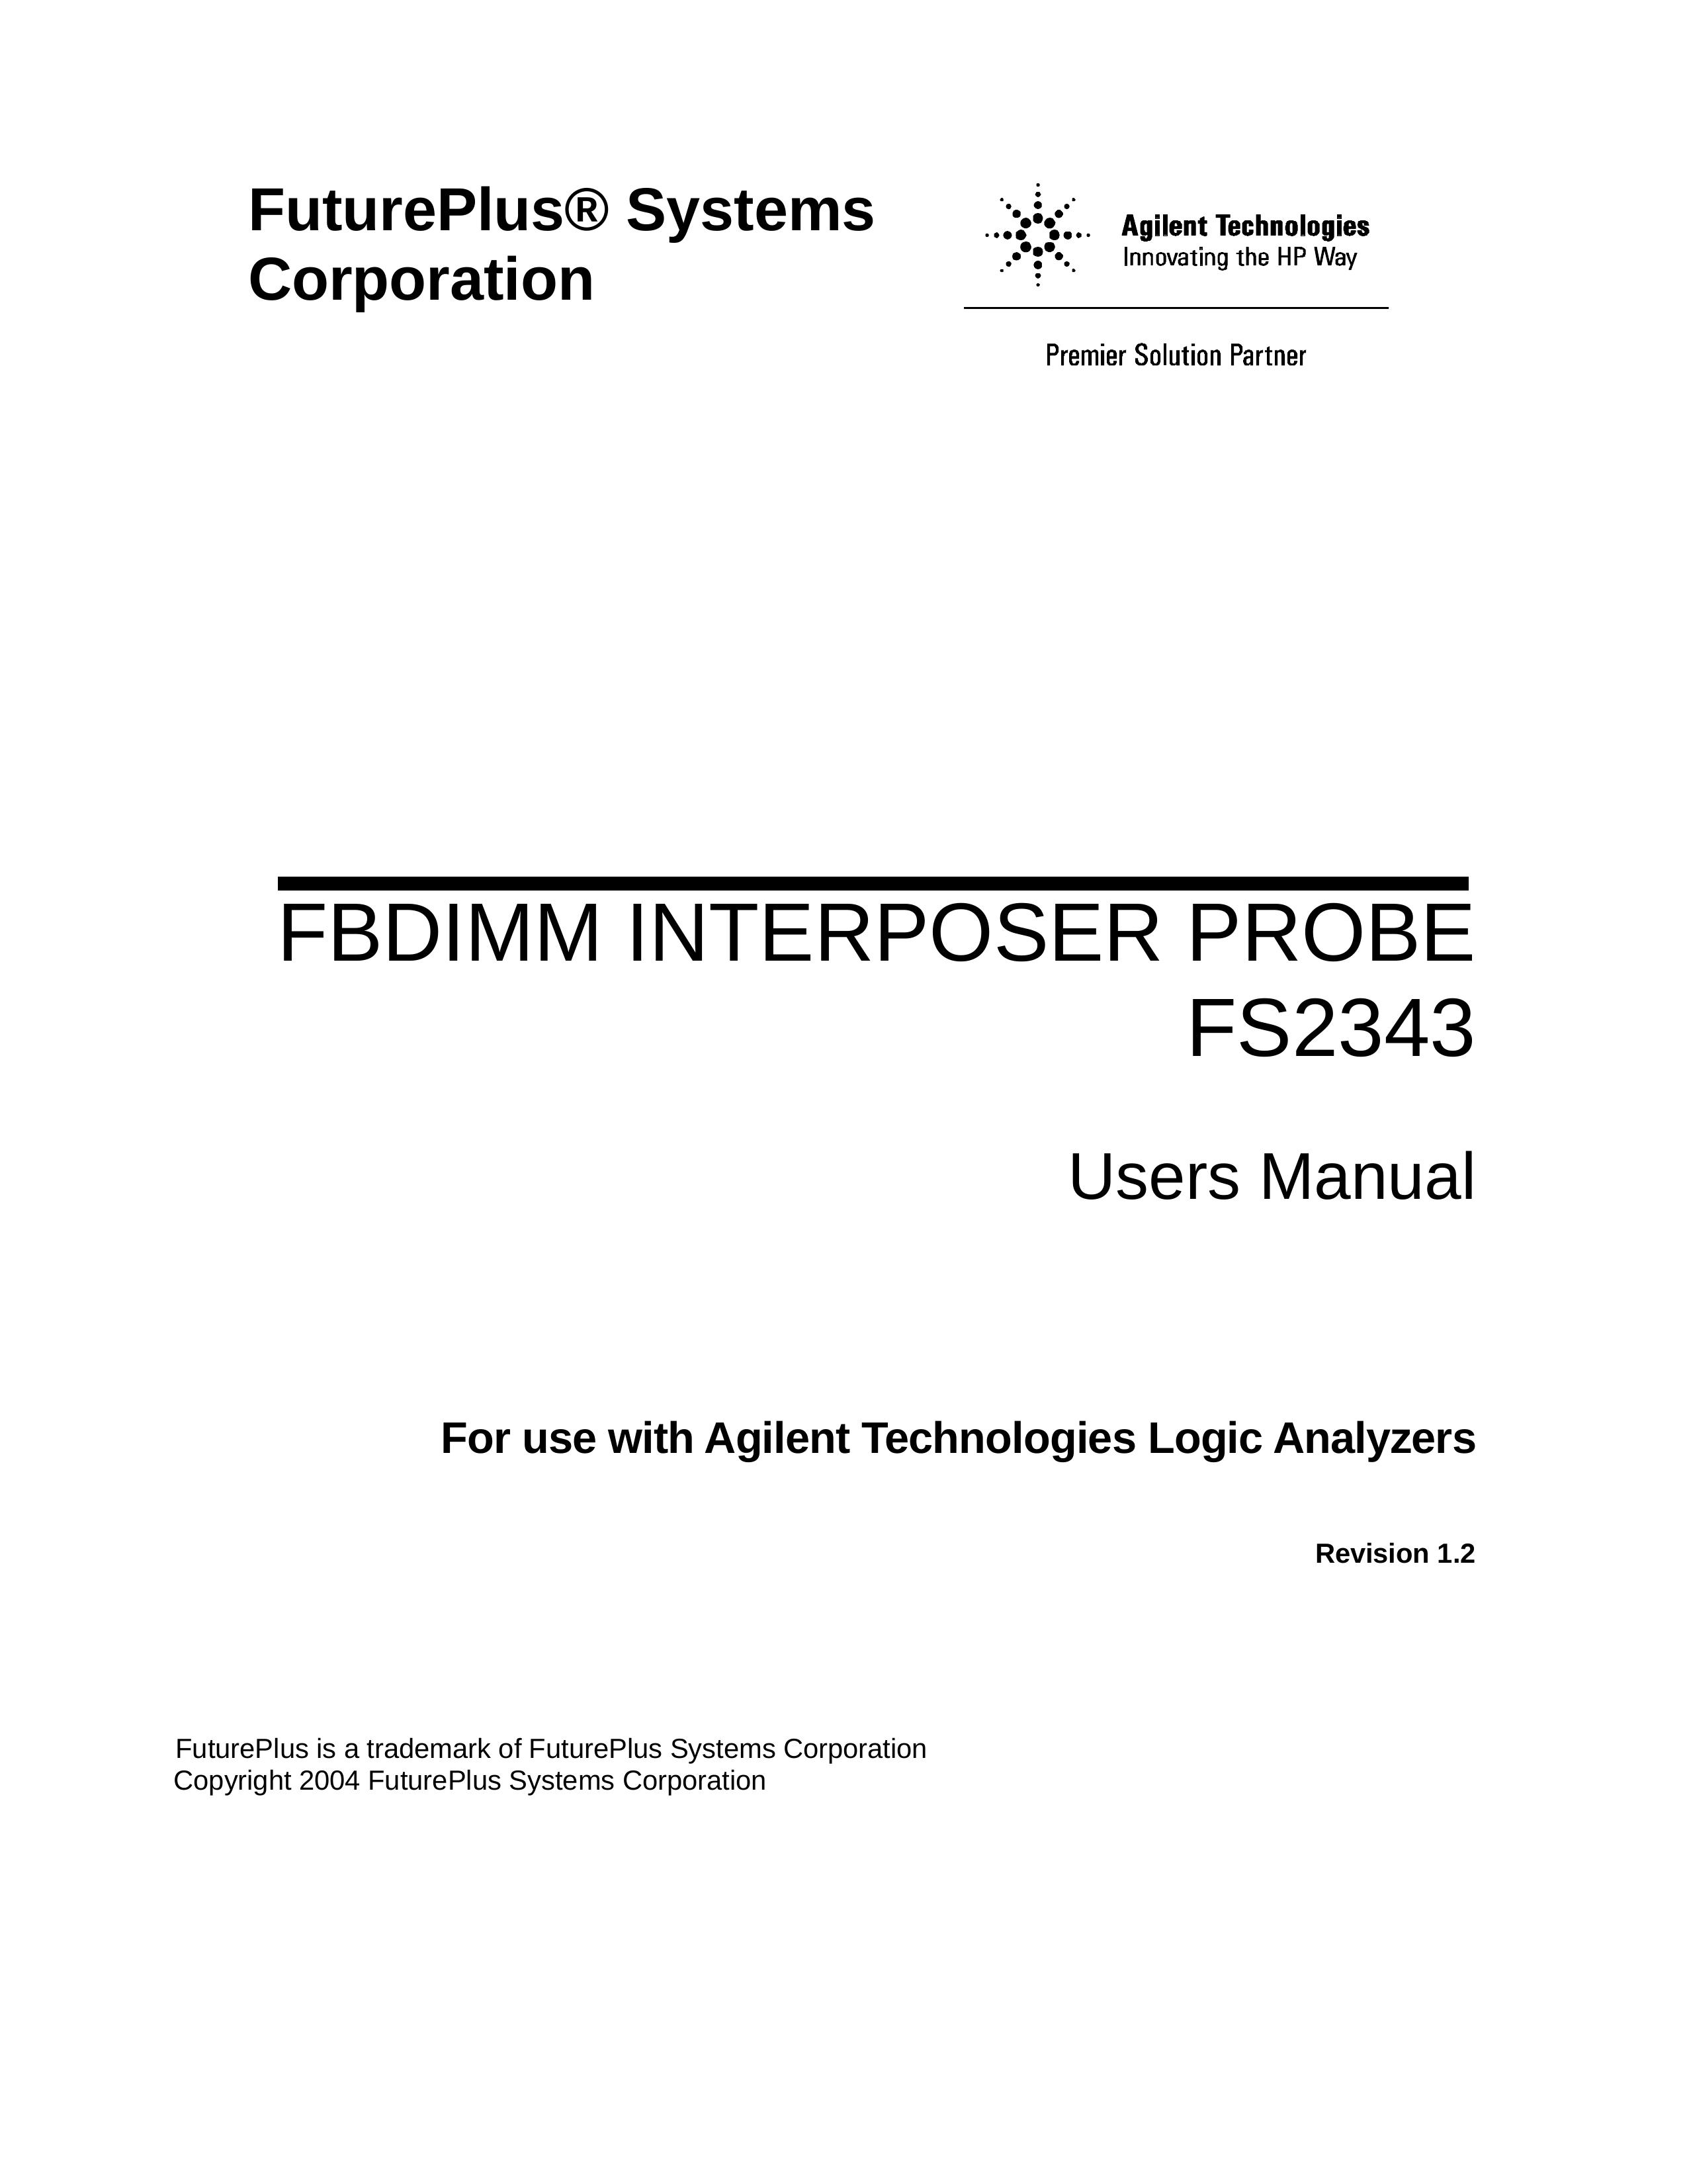 Agilent Technologies FS2343 Thermometer User Manual